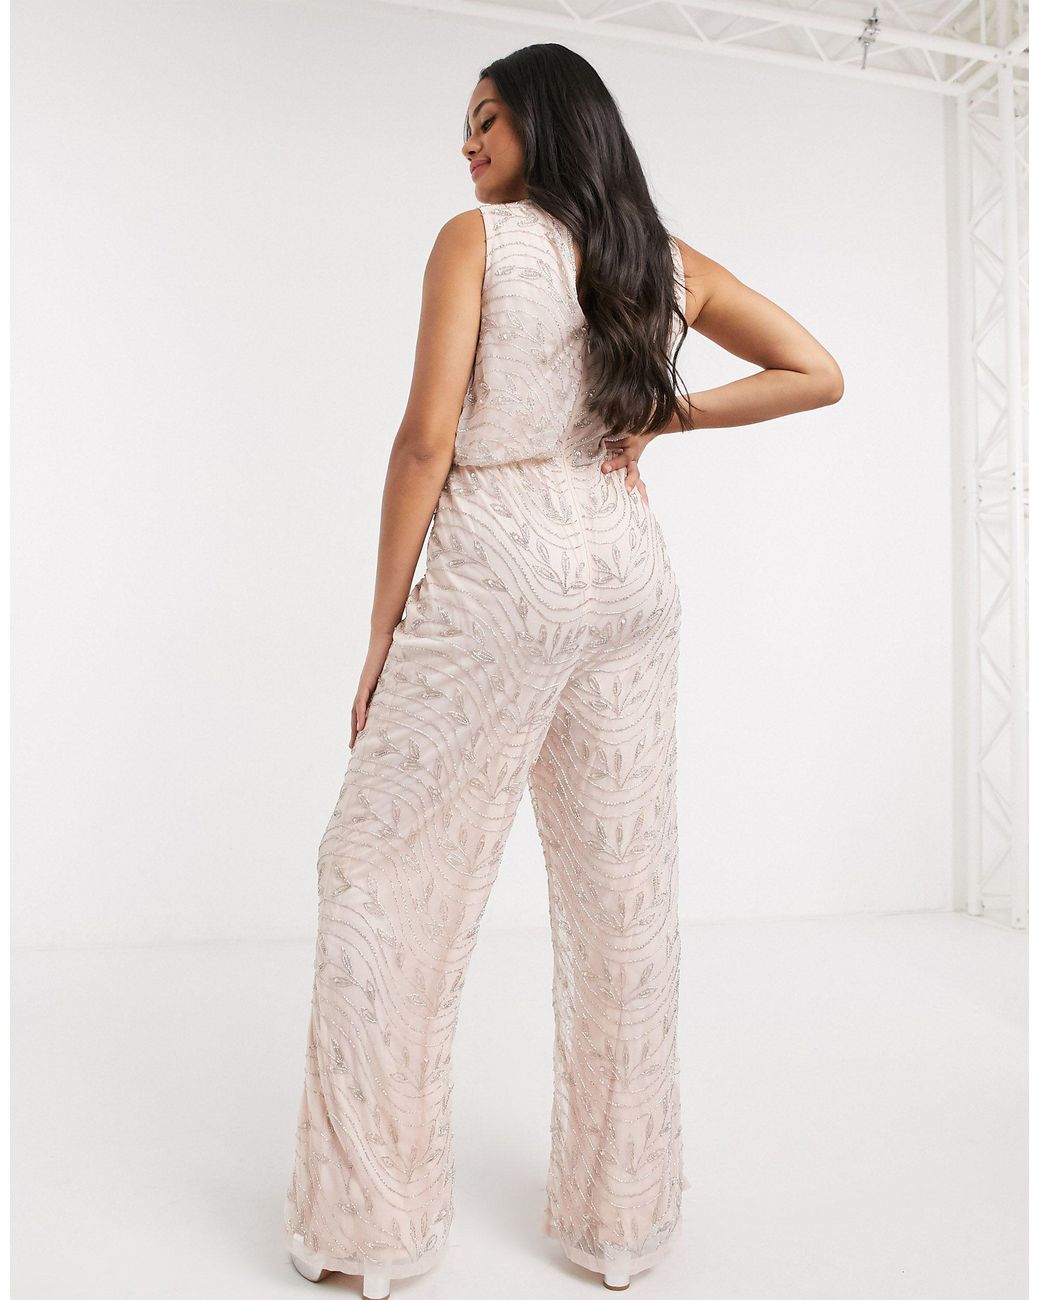 LACE & BEADS Embellished Jumpsuit in Natural | Lyst